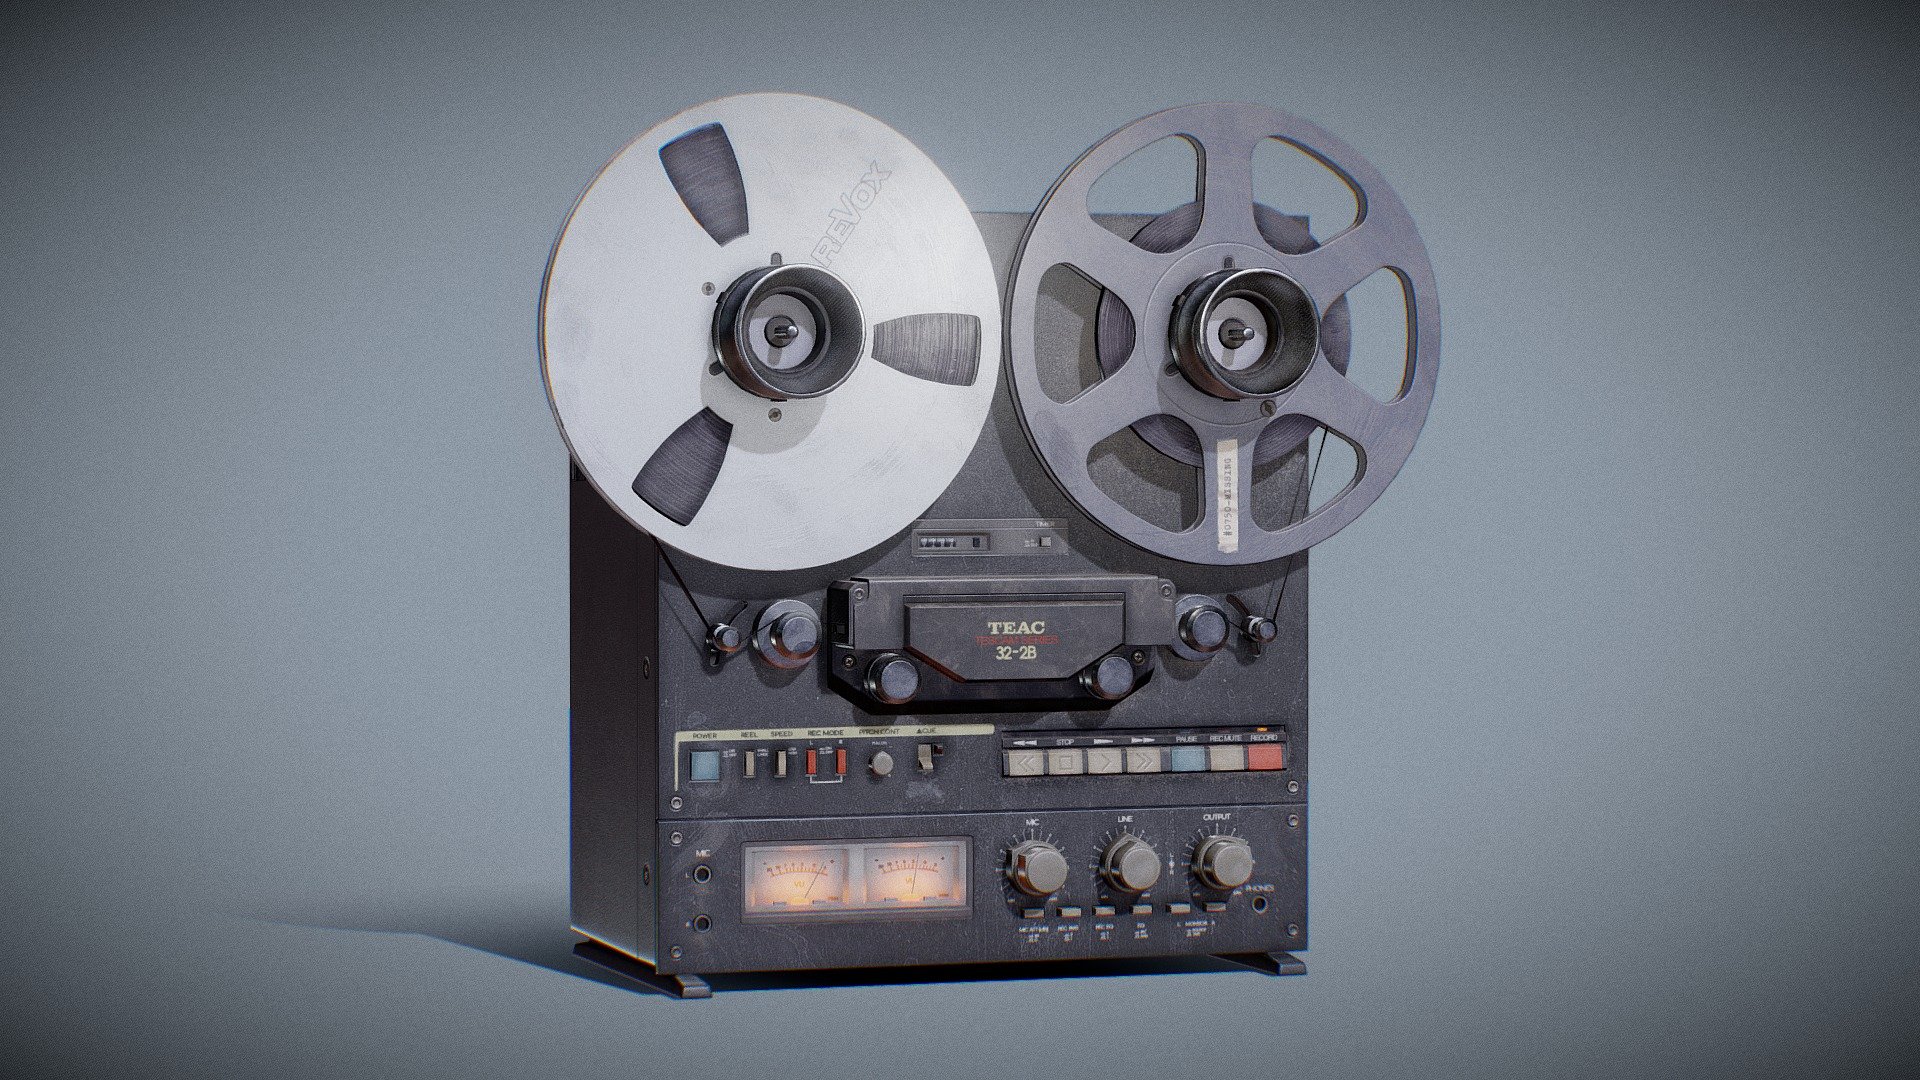 Mid poly model of the TEAC Tascam Series 32-2B tape recorder.
Using two 2K map for the base texture and one 1K map for the glass.
Feedbacks are appreciated! - Reel-to-Reel Tape Recorder - Download Free 3D model by YJ_ 3d model